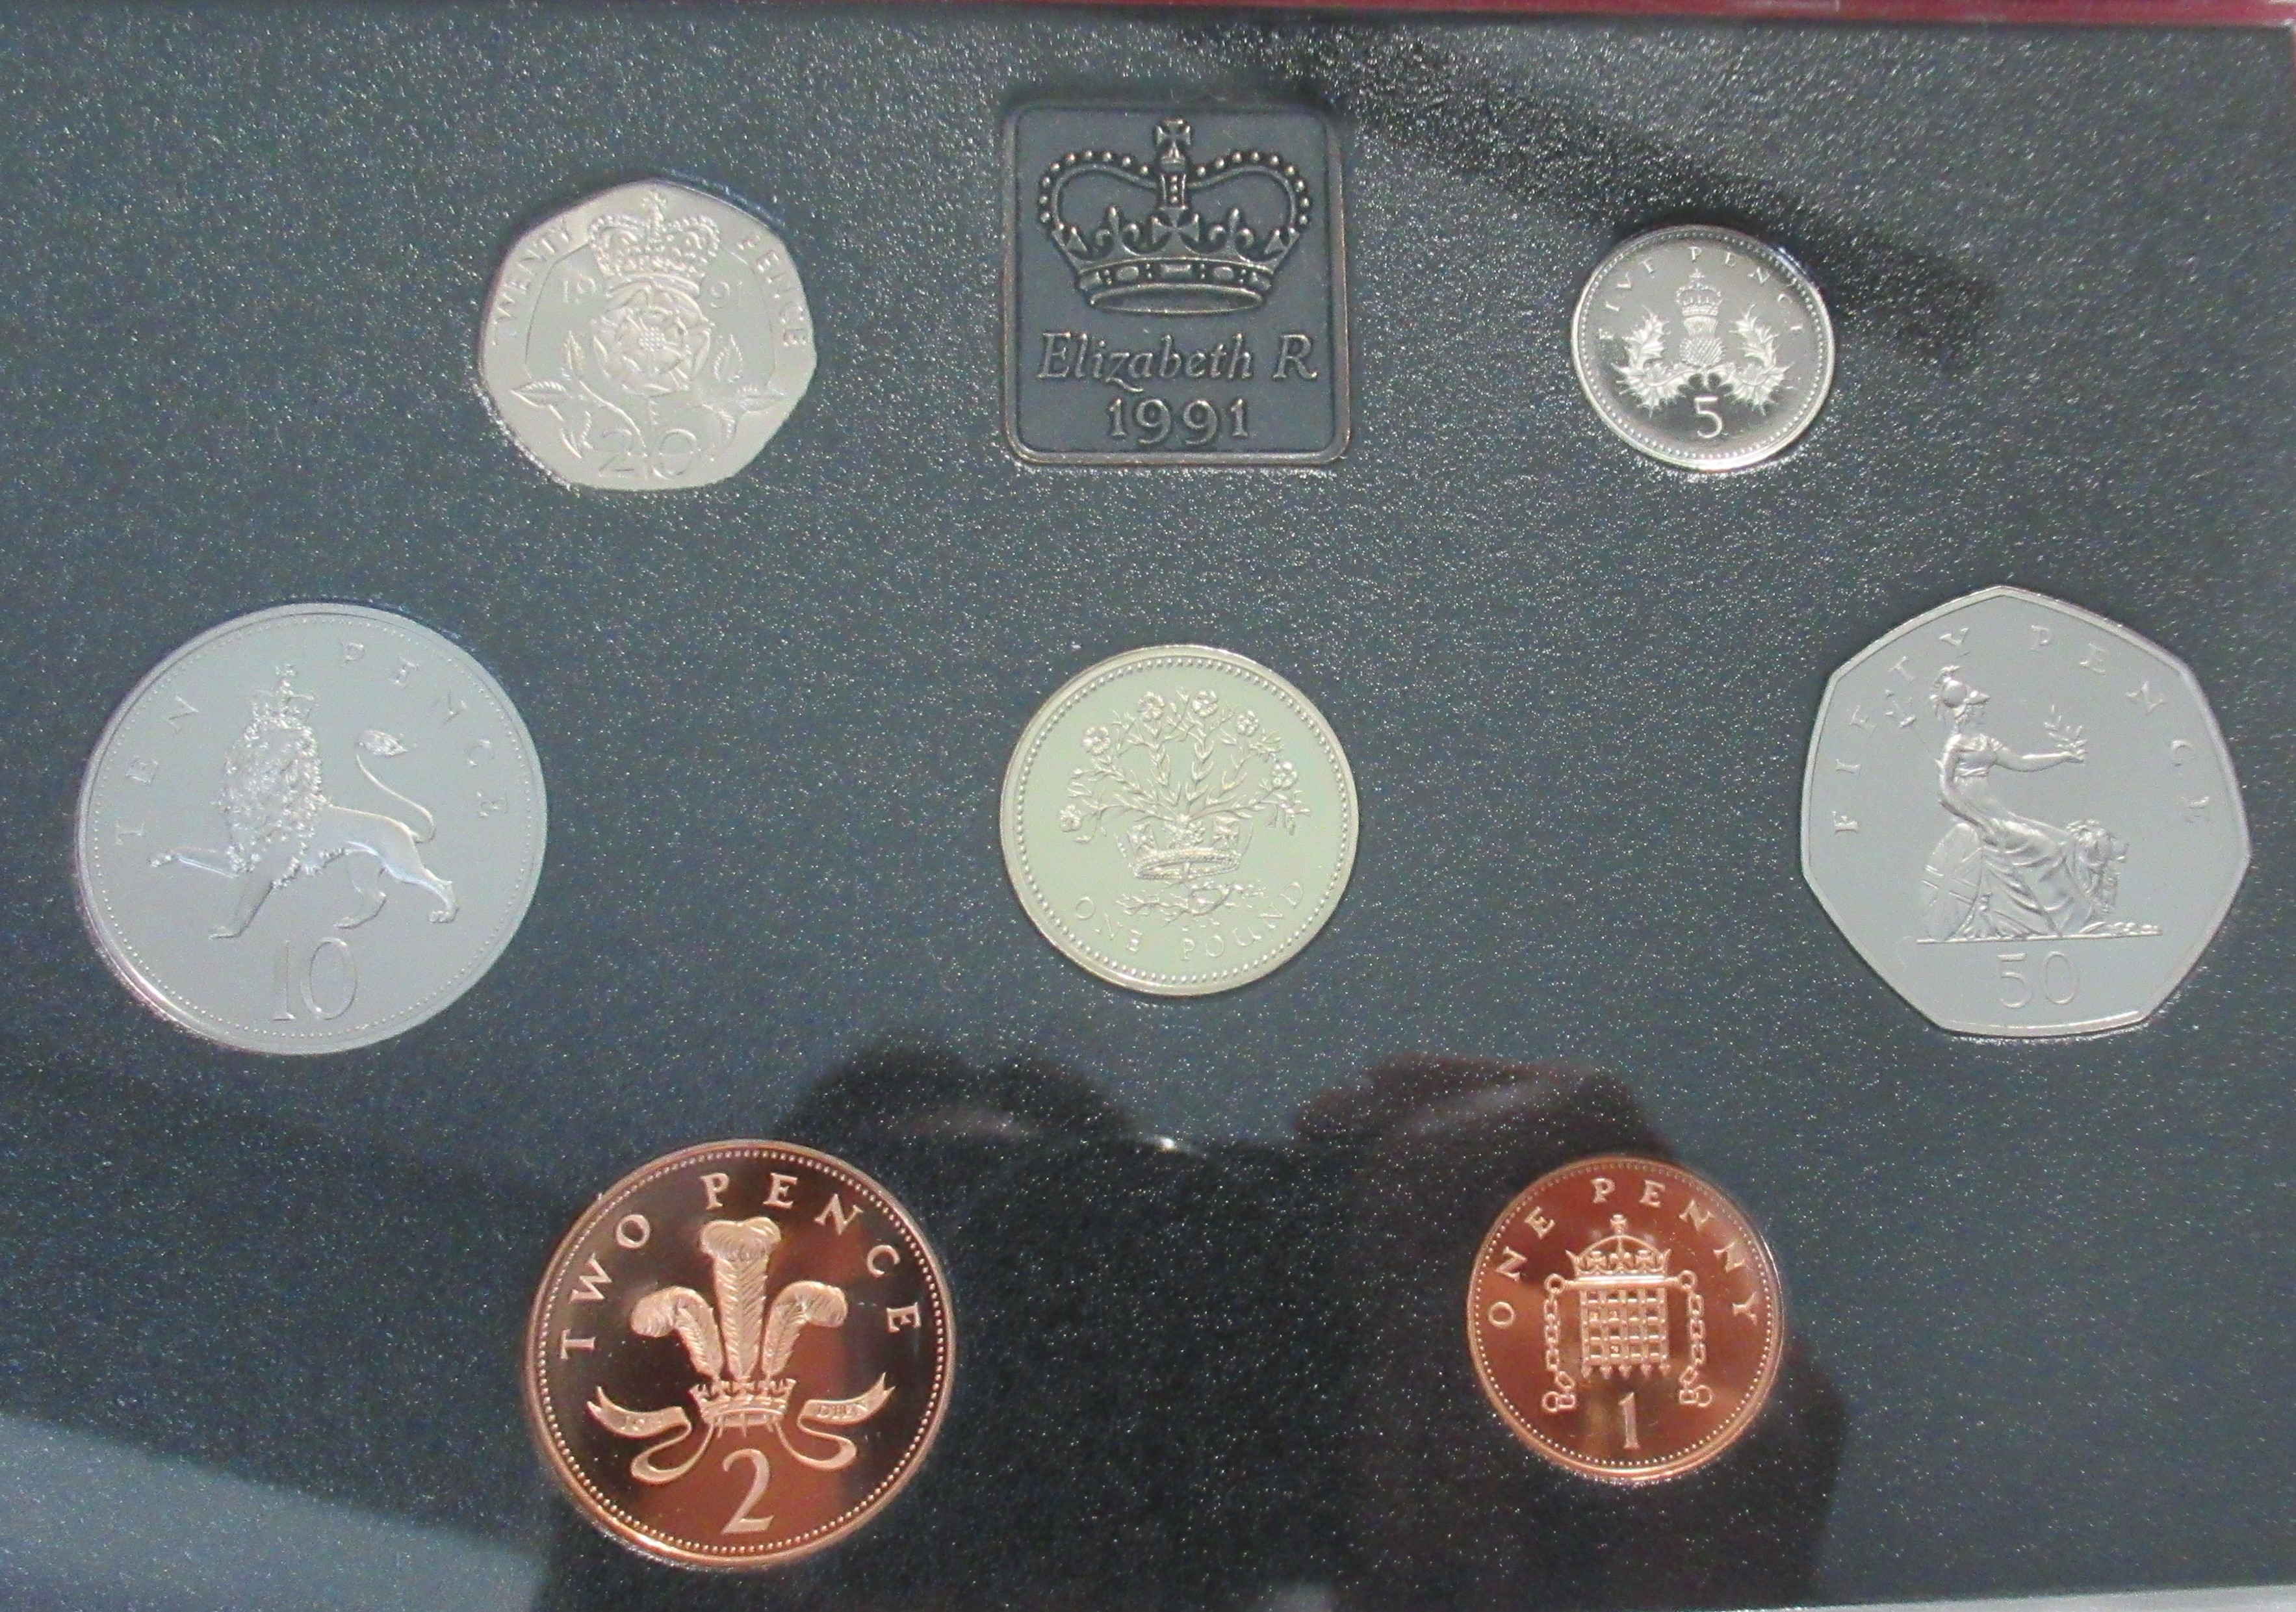 A 1997 silver proof piedfort one pound coin, together with a 1991 United Kingdom proof coin - Image 2 of 2